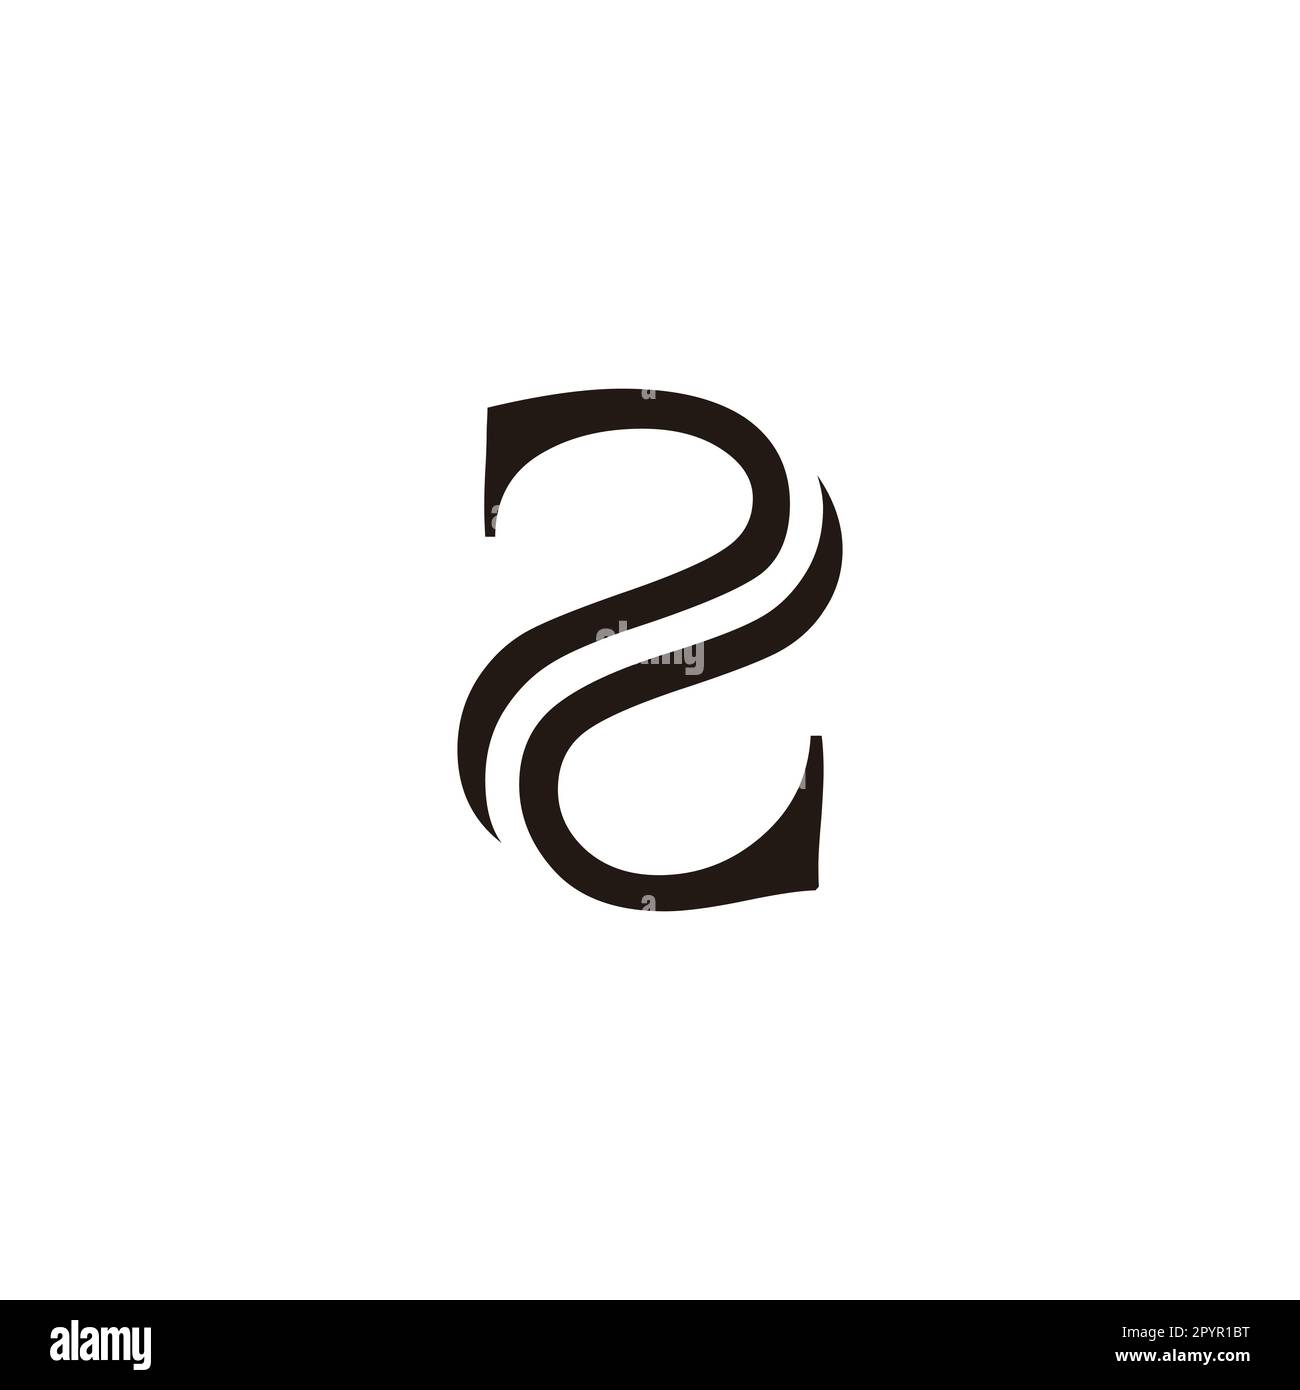 Zhi-Yun Zhang on X: Logo Treating/Double Snakes out of the #Stüssy # Monogram #logo #graphicdesign #simple #idea #snake #blackandyellow   / X